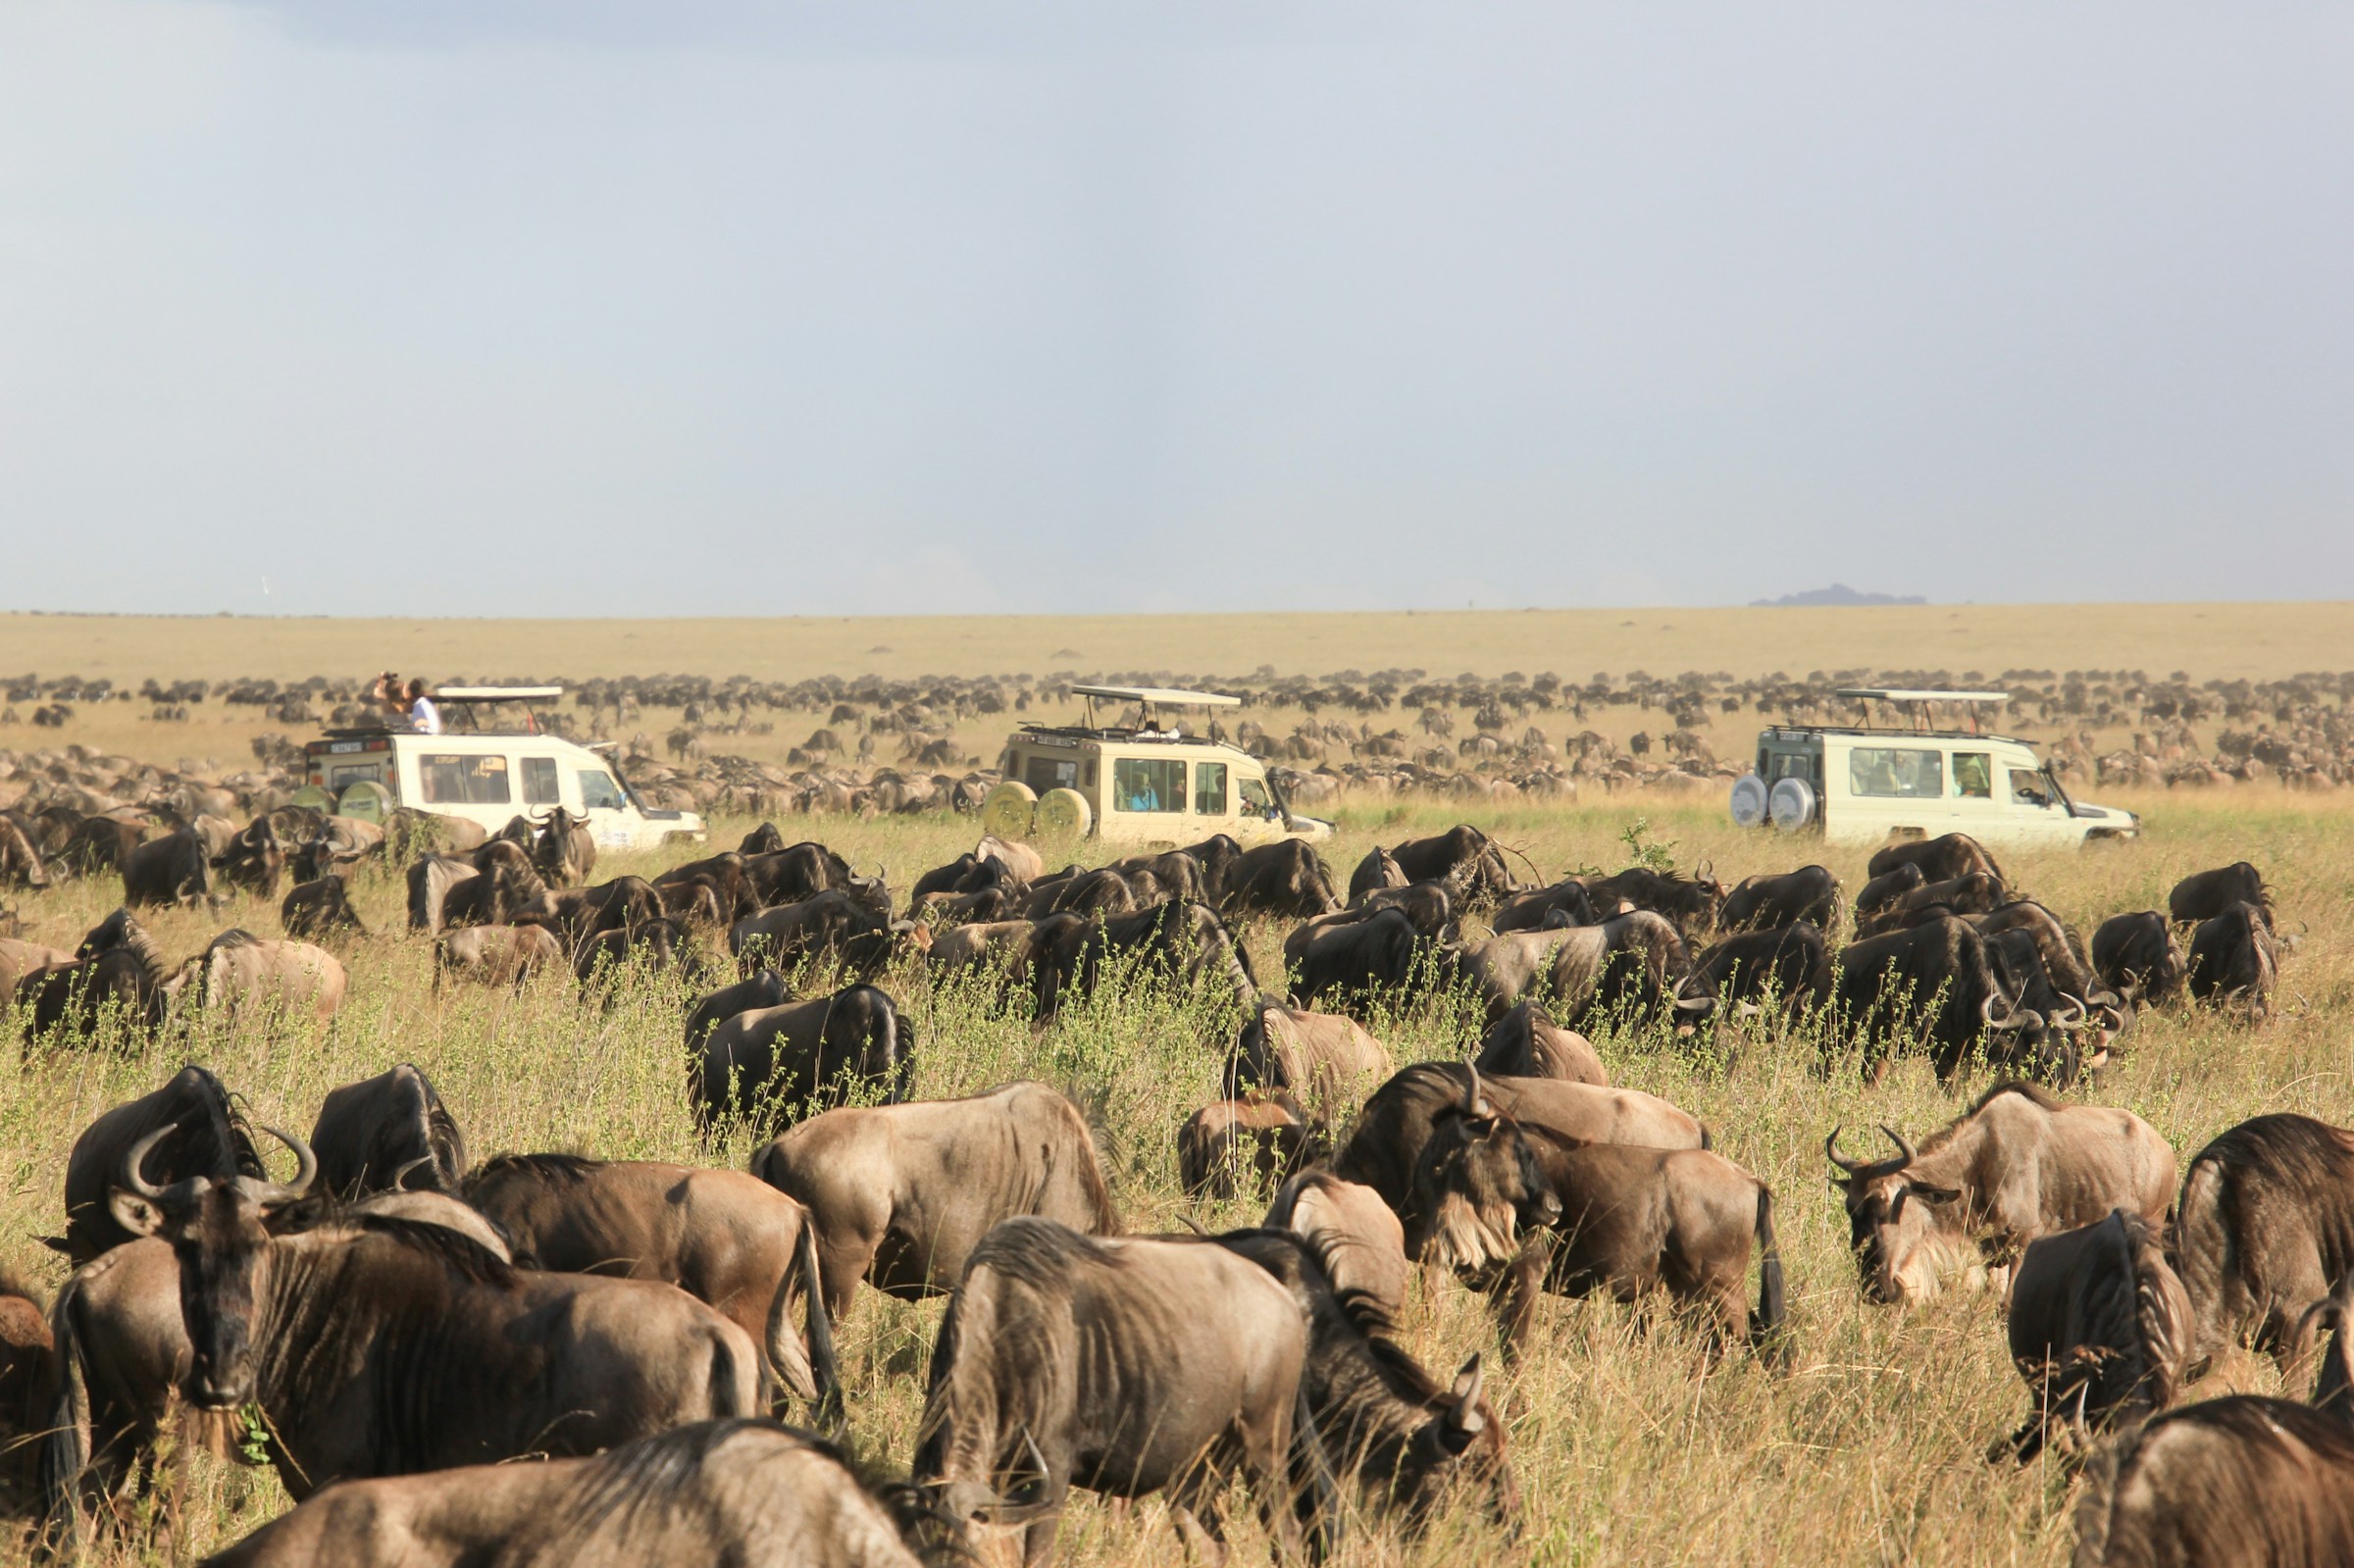 When to visit Tanzania for the best wildlife viewing